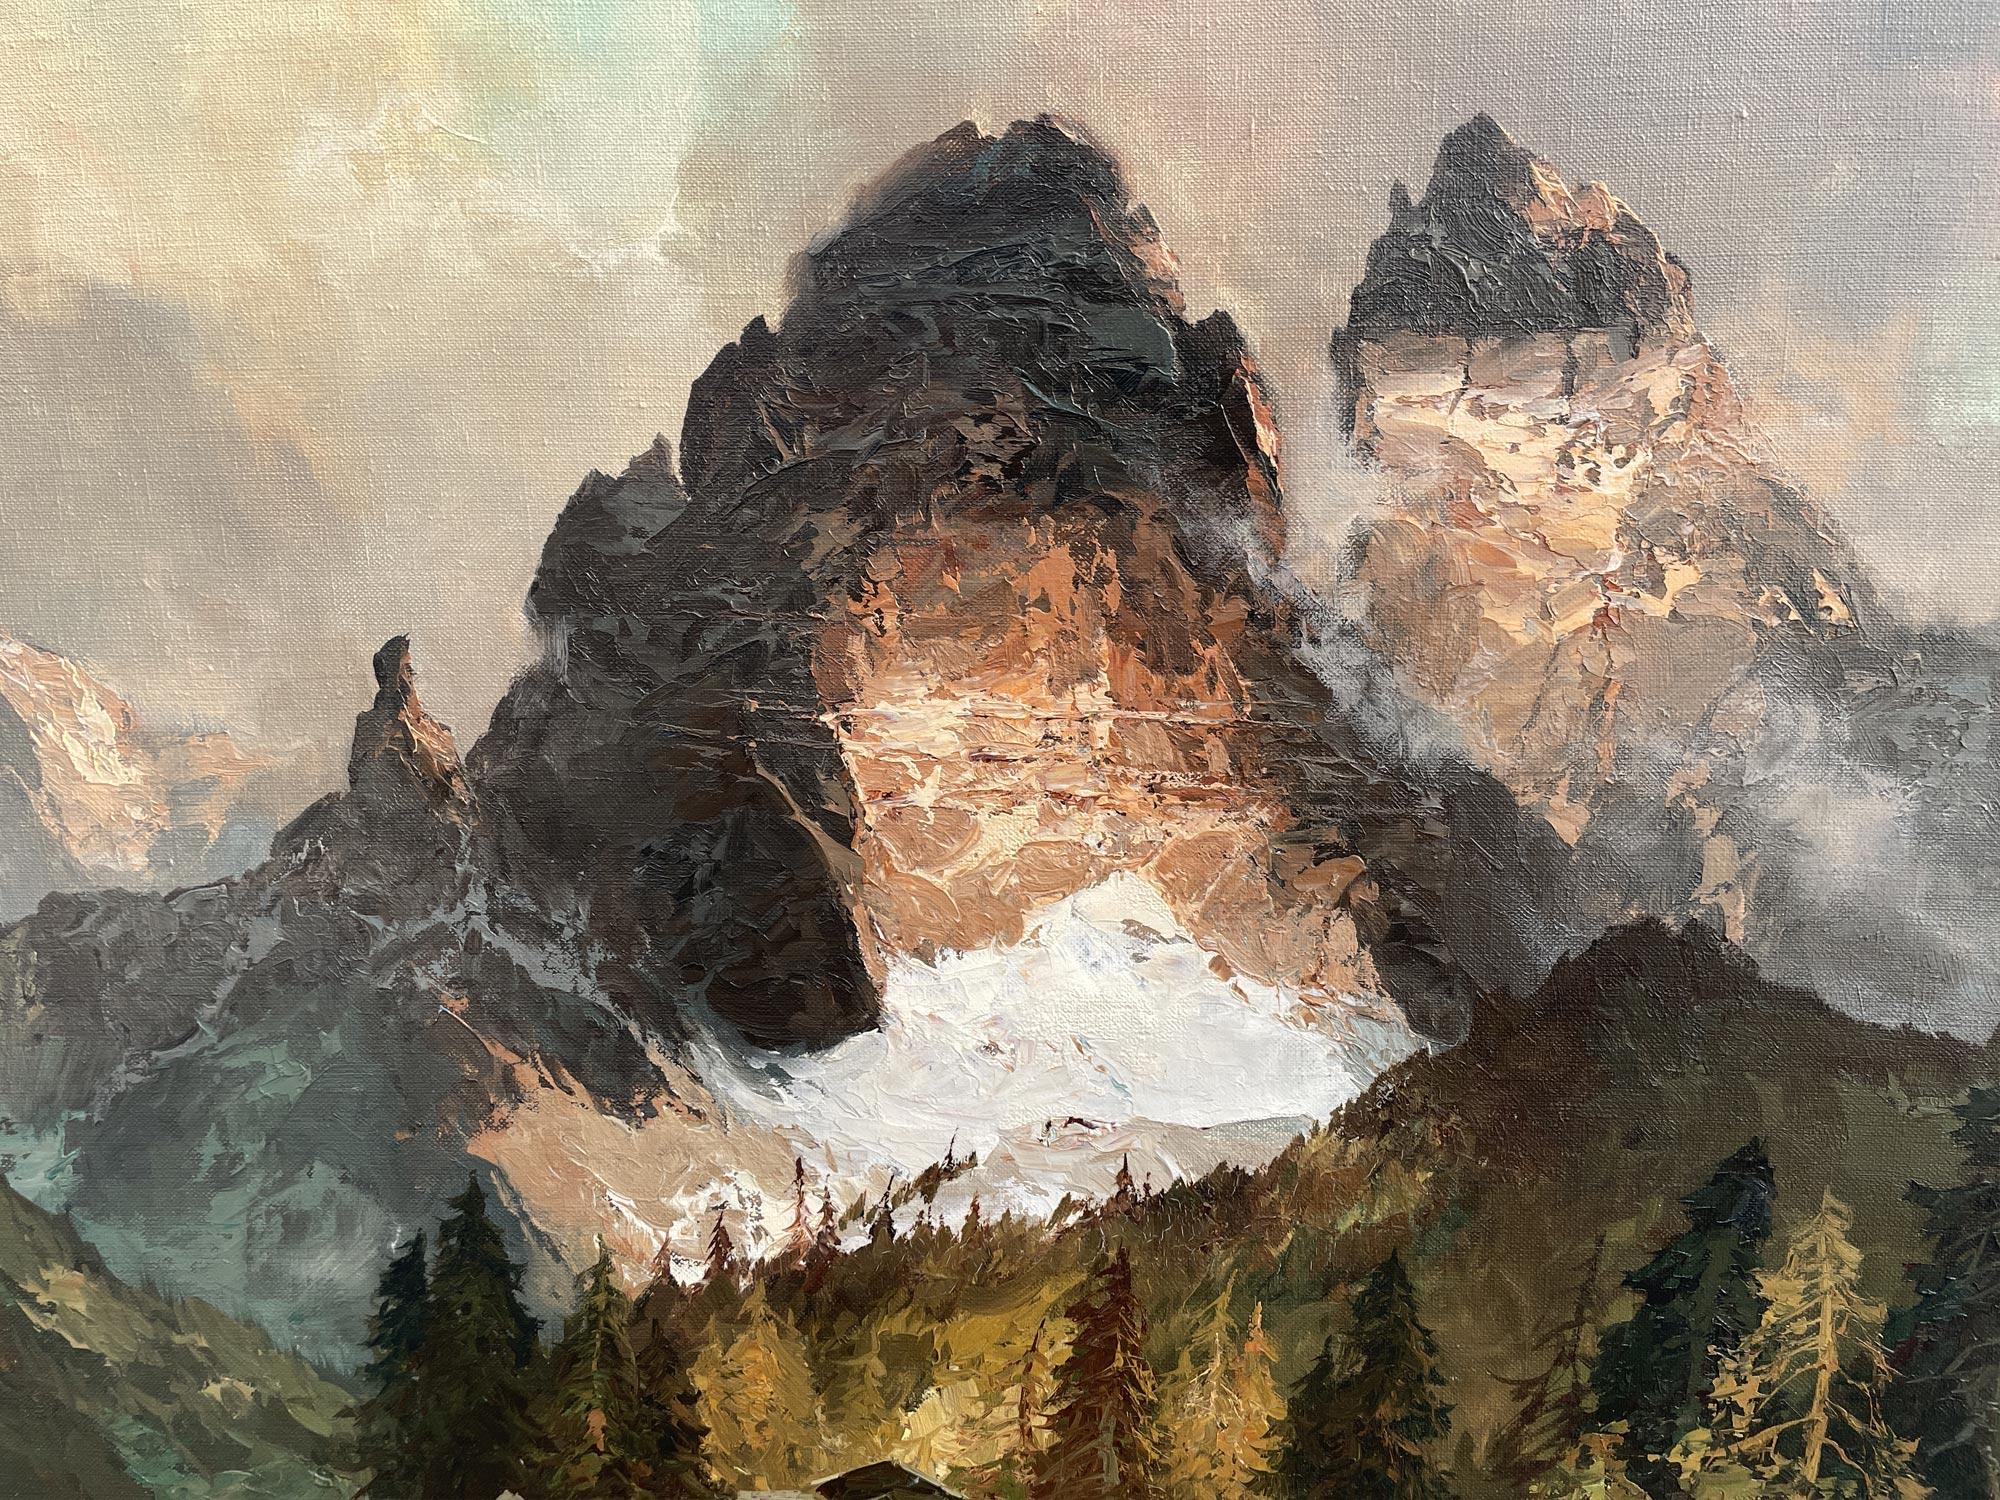 Mid-20th Century Italian Dolomites – Oil on Canvas by Arno Lemke - 1950 For Sale